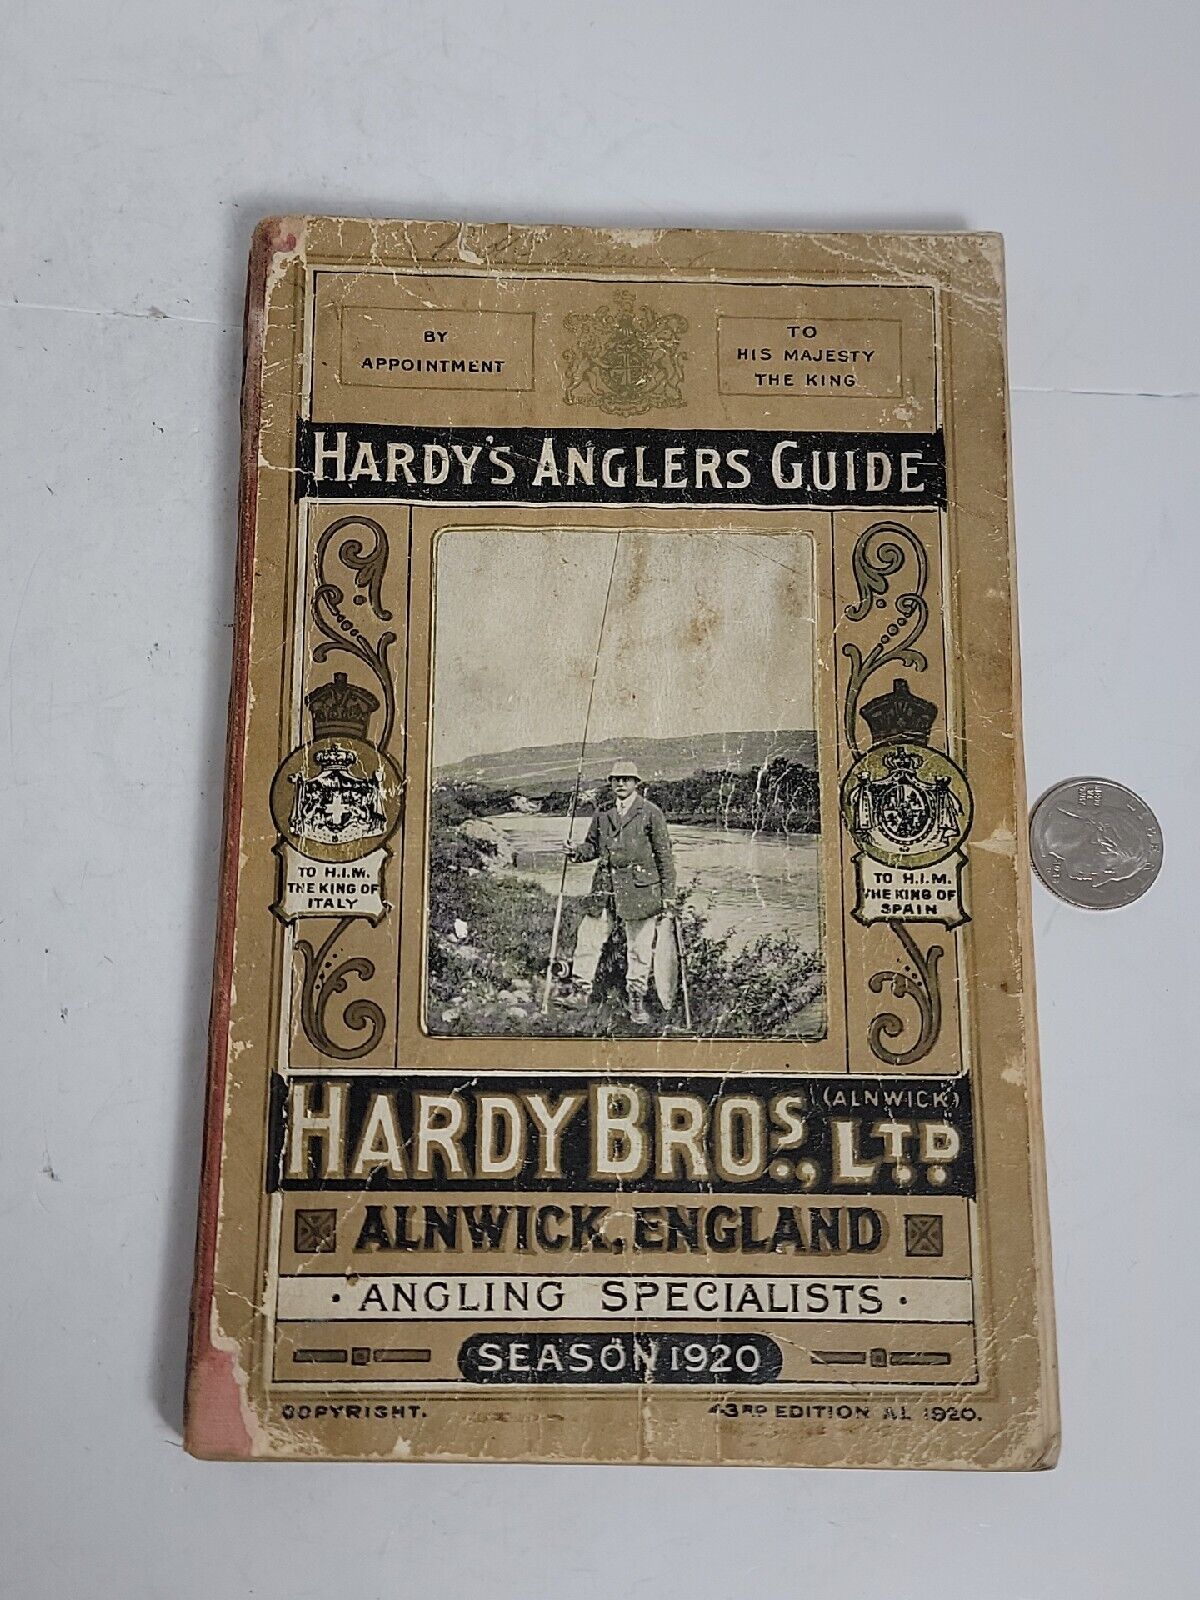 Hardy Bros ltd England anglers guide 43rd edition 1920 392 pages GOOD 4 age RARE